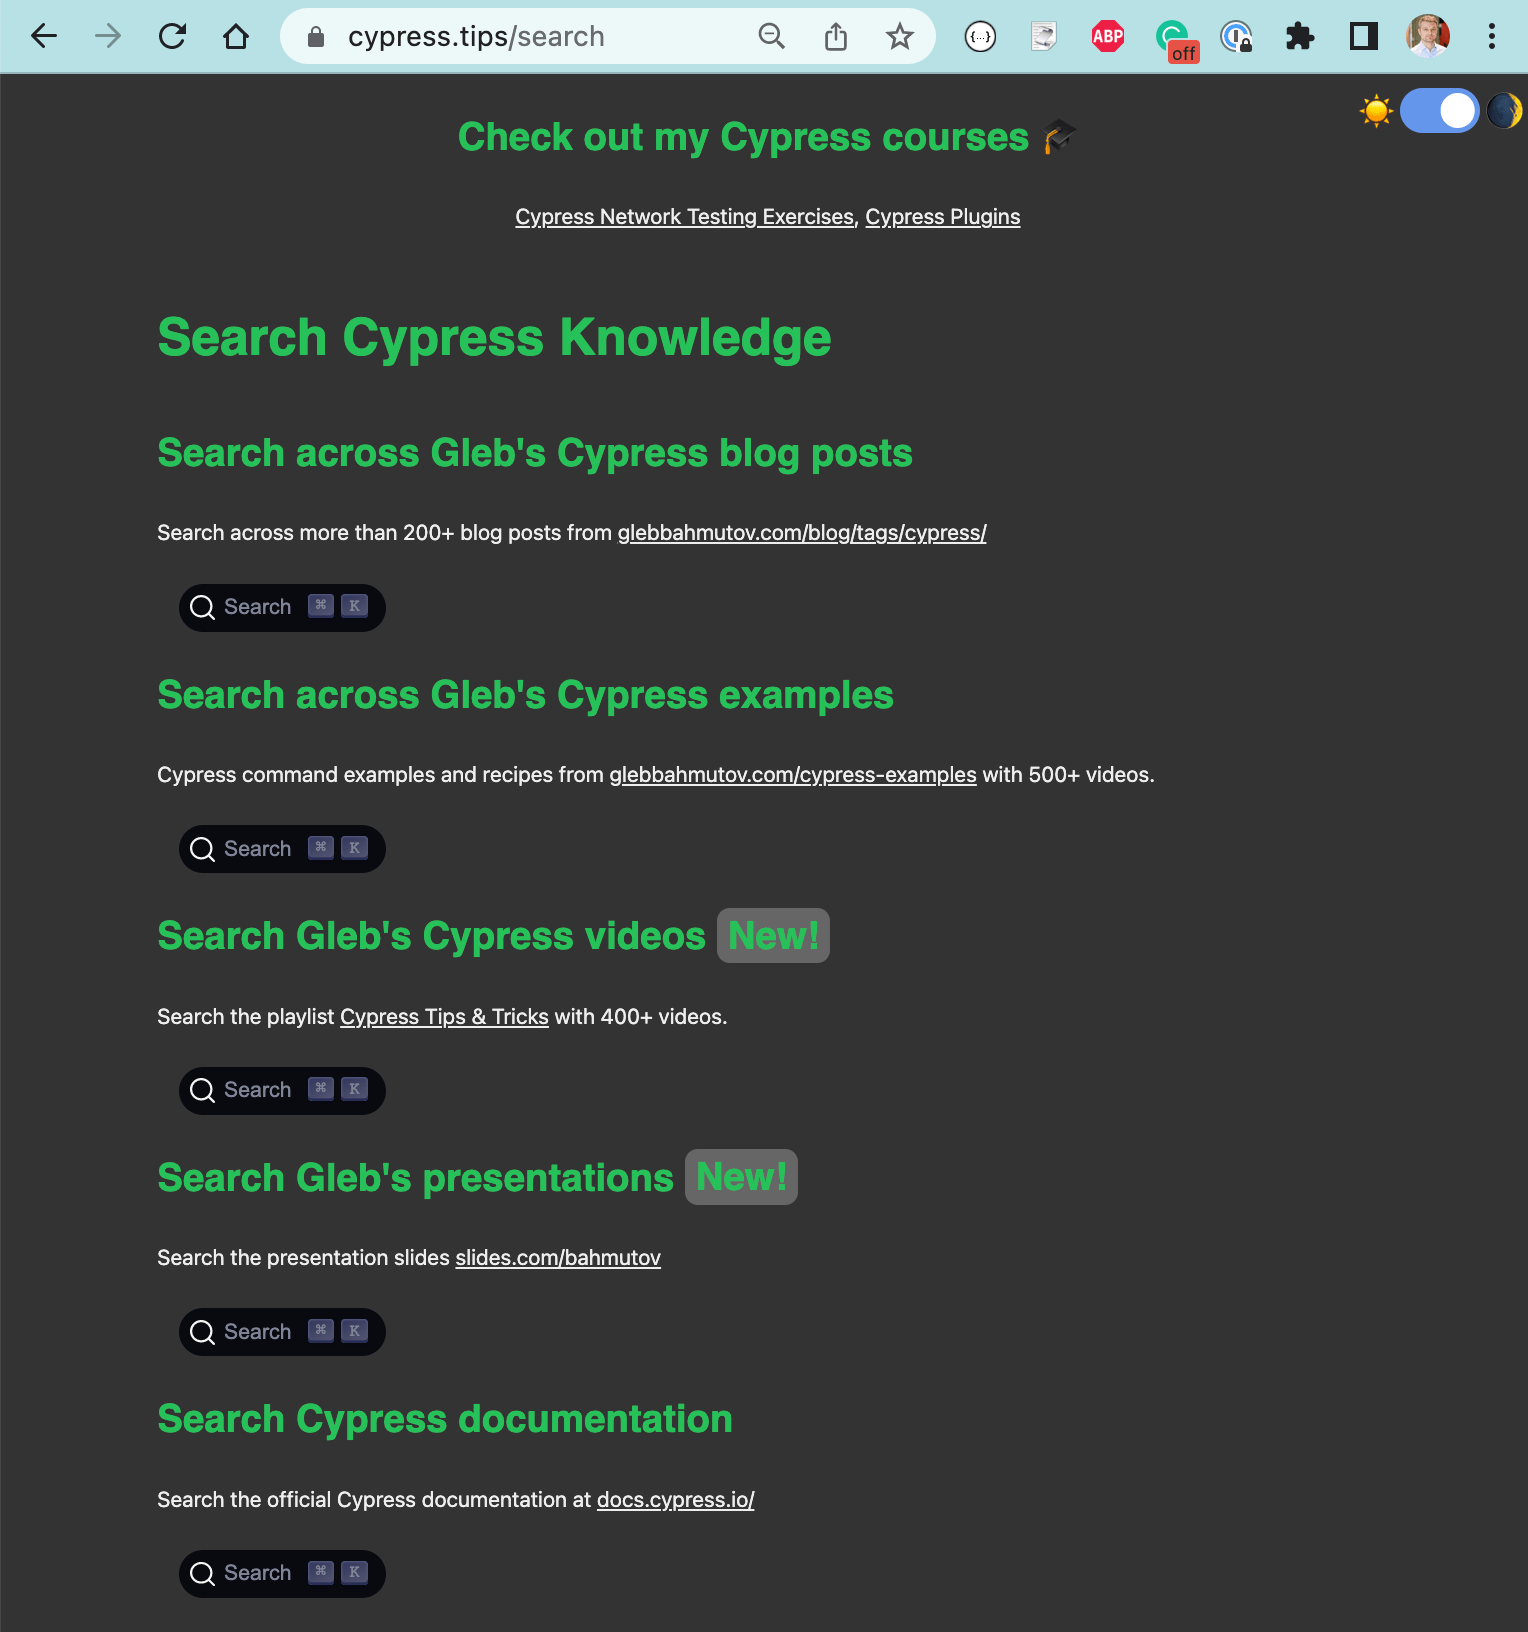 cypress-tips-search.png